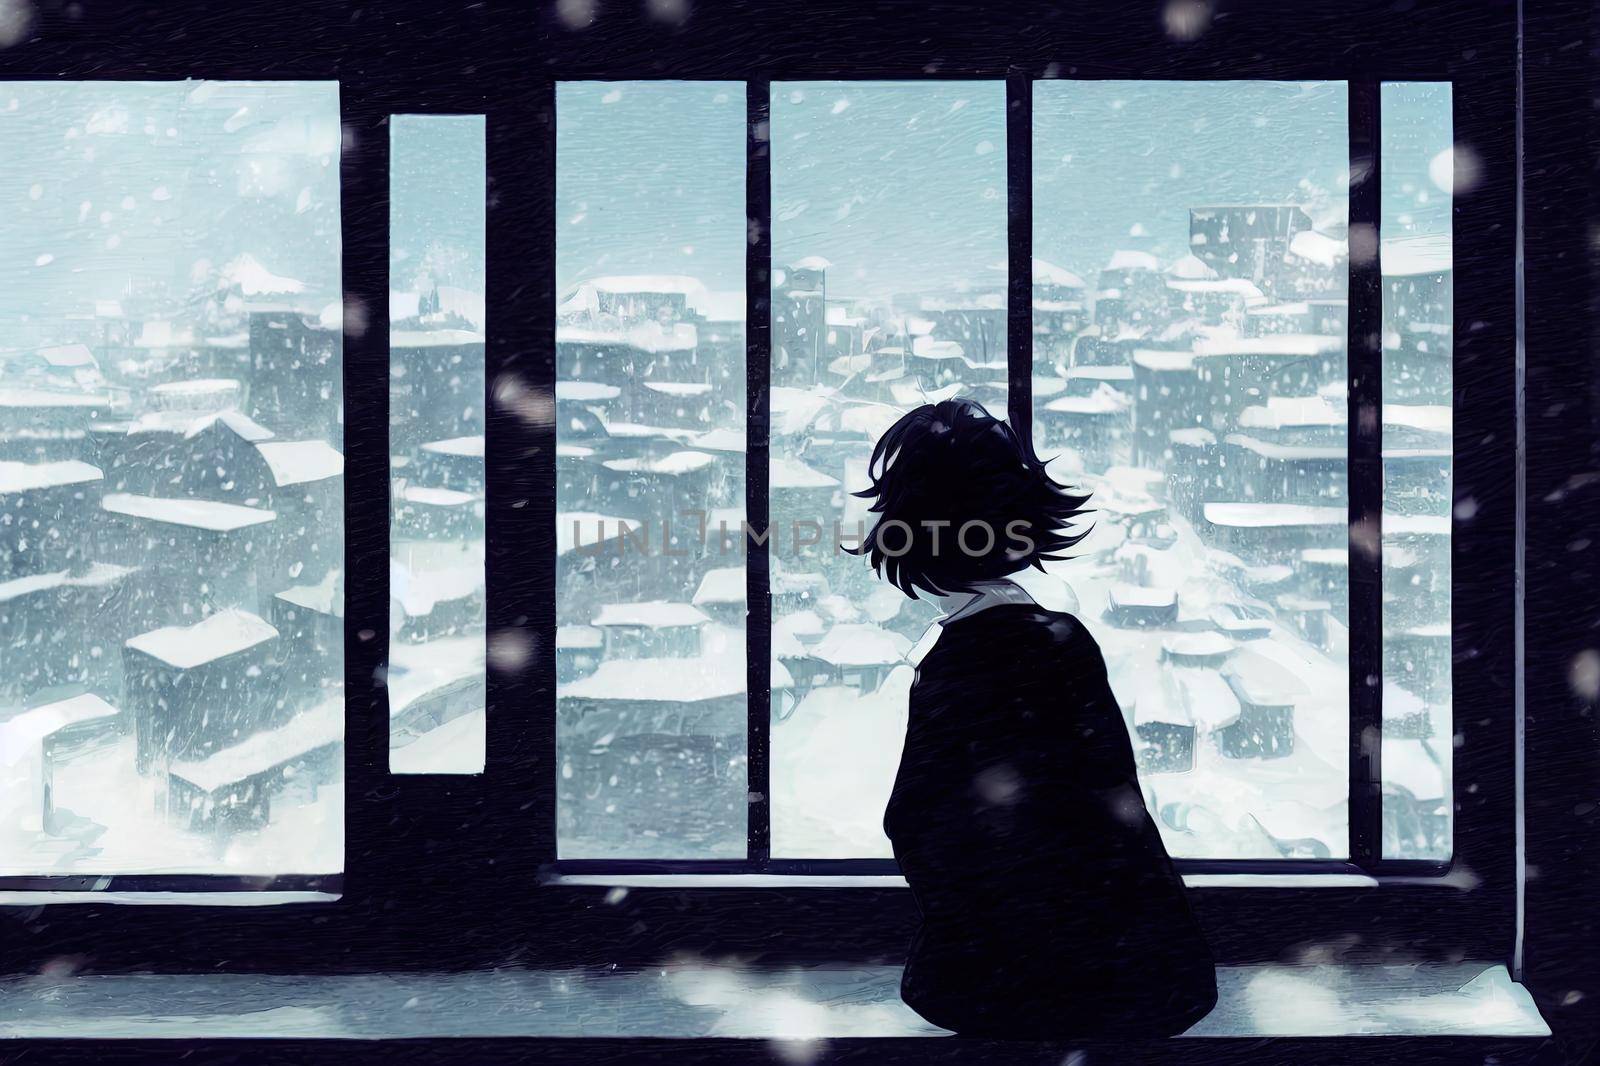 A woman looks out of the window at the High quality 2d illustration. by 2ragon